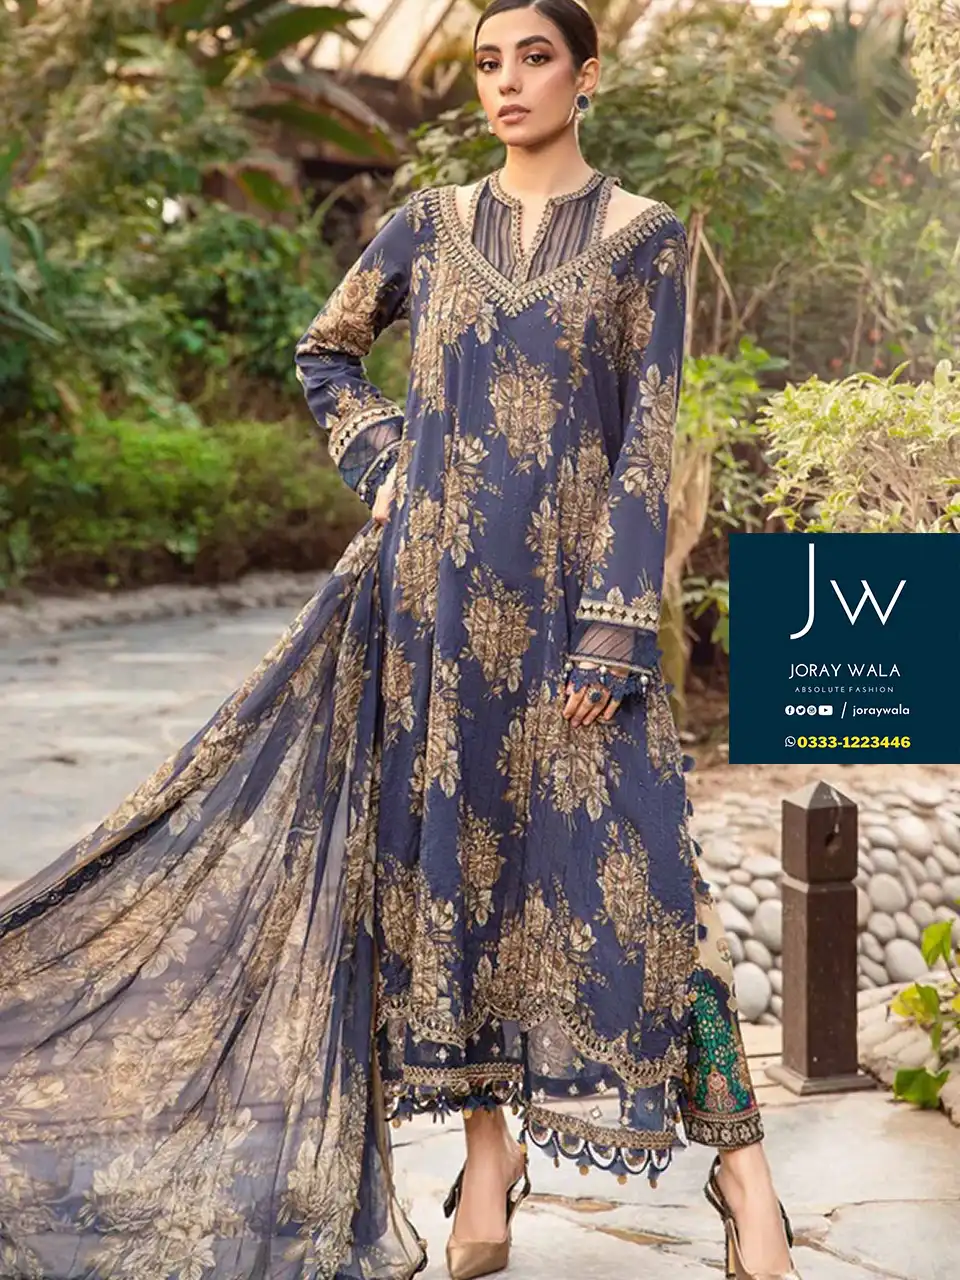 Party wear fancy Lawn Master Copy MBL-MPT-2110-B-24 with free delivery available at joraywala